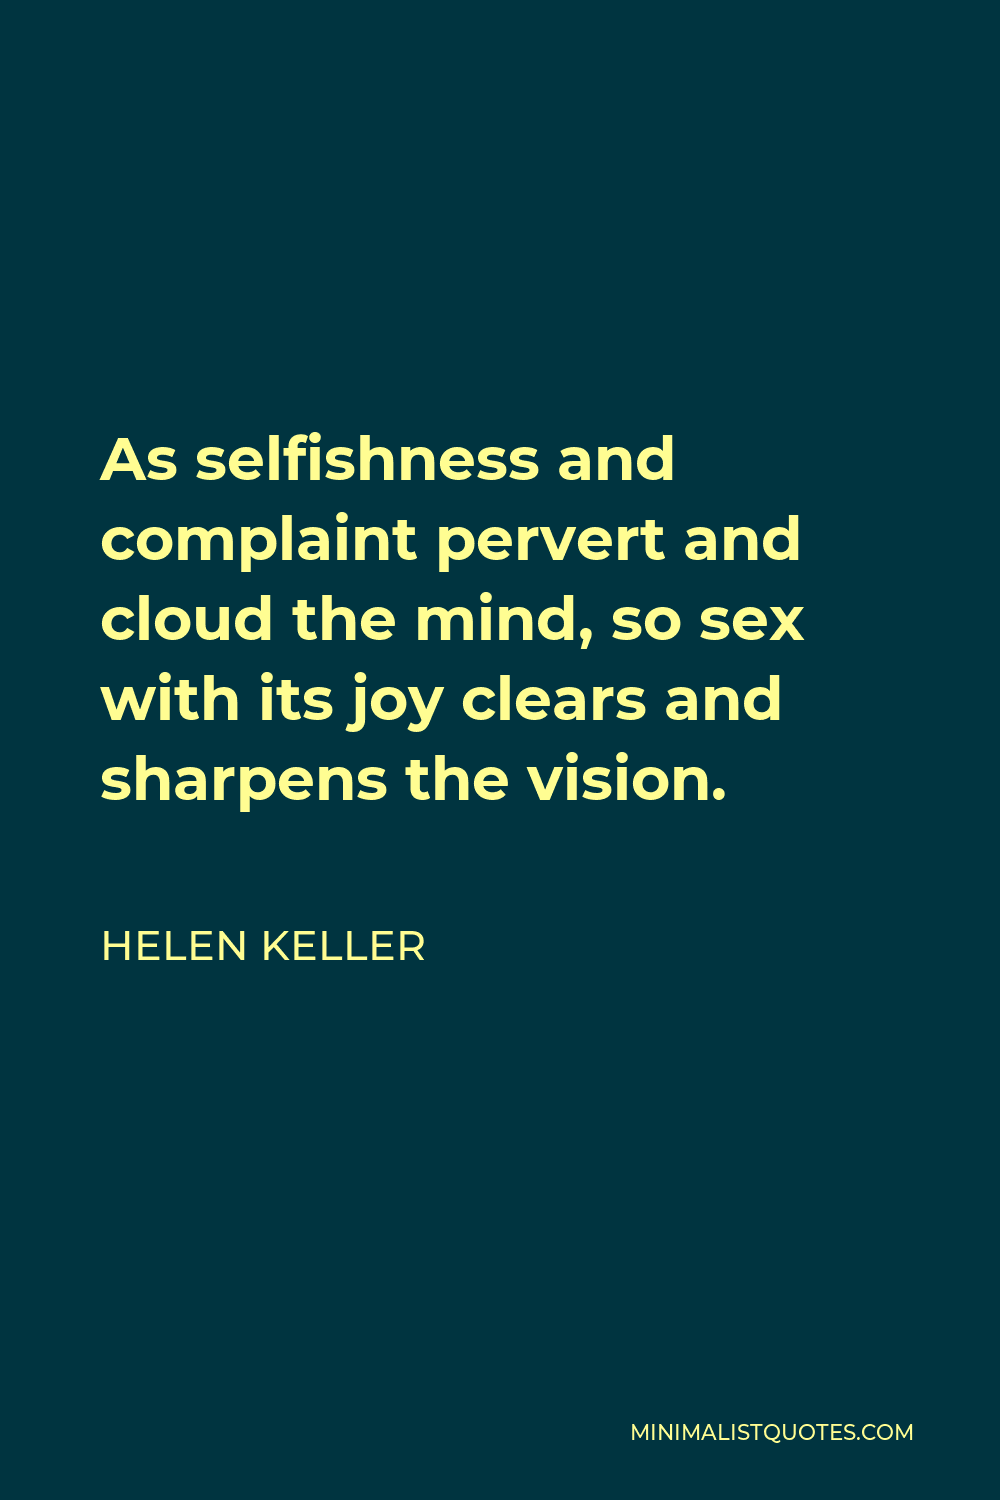 Helen Keller Quote - As selfishness and complaint pervert and cloud the mind, so sex with its joy clears and sharpens the vision.